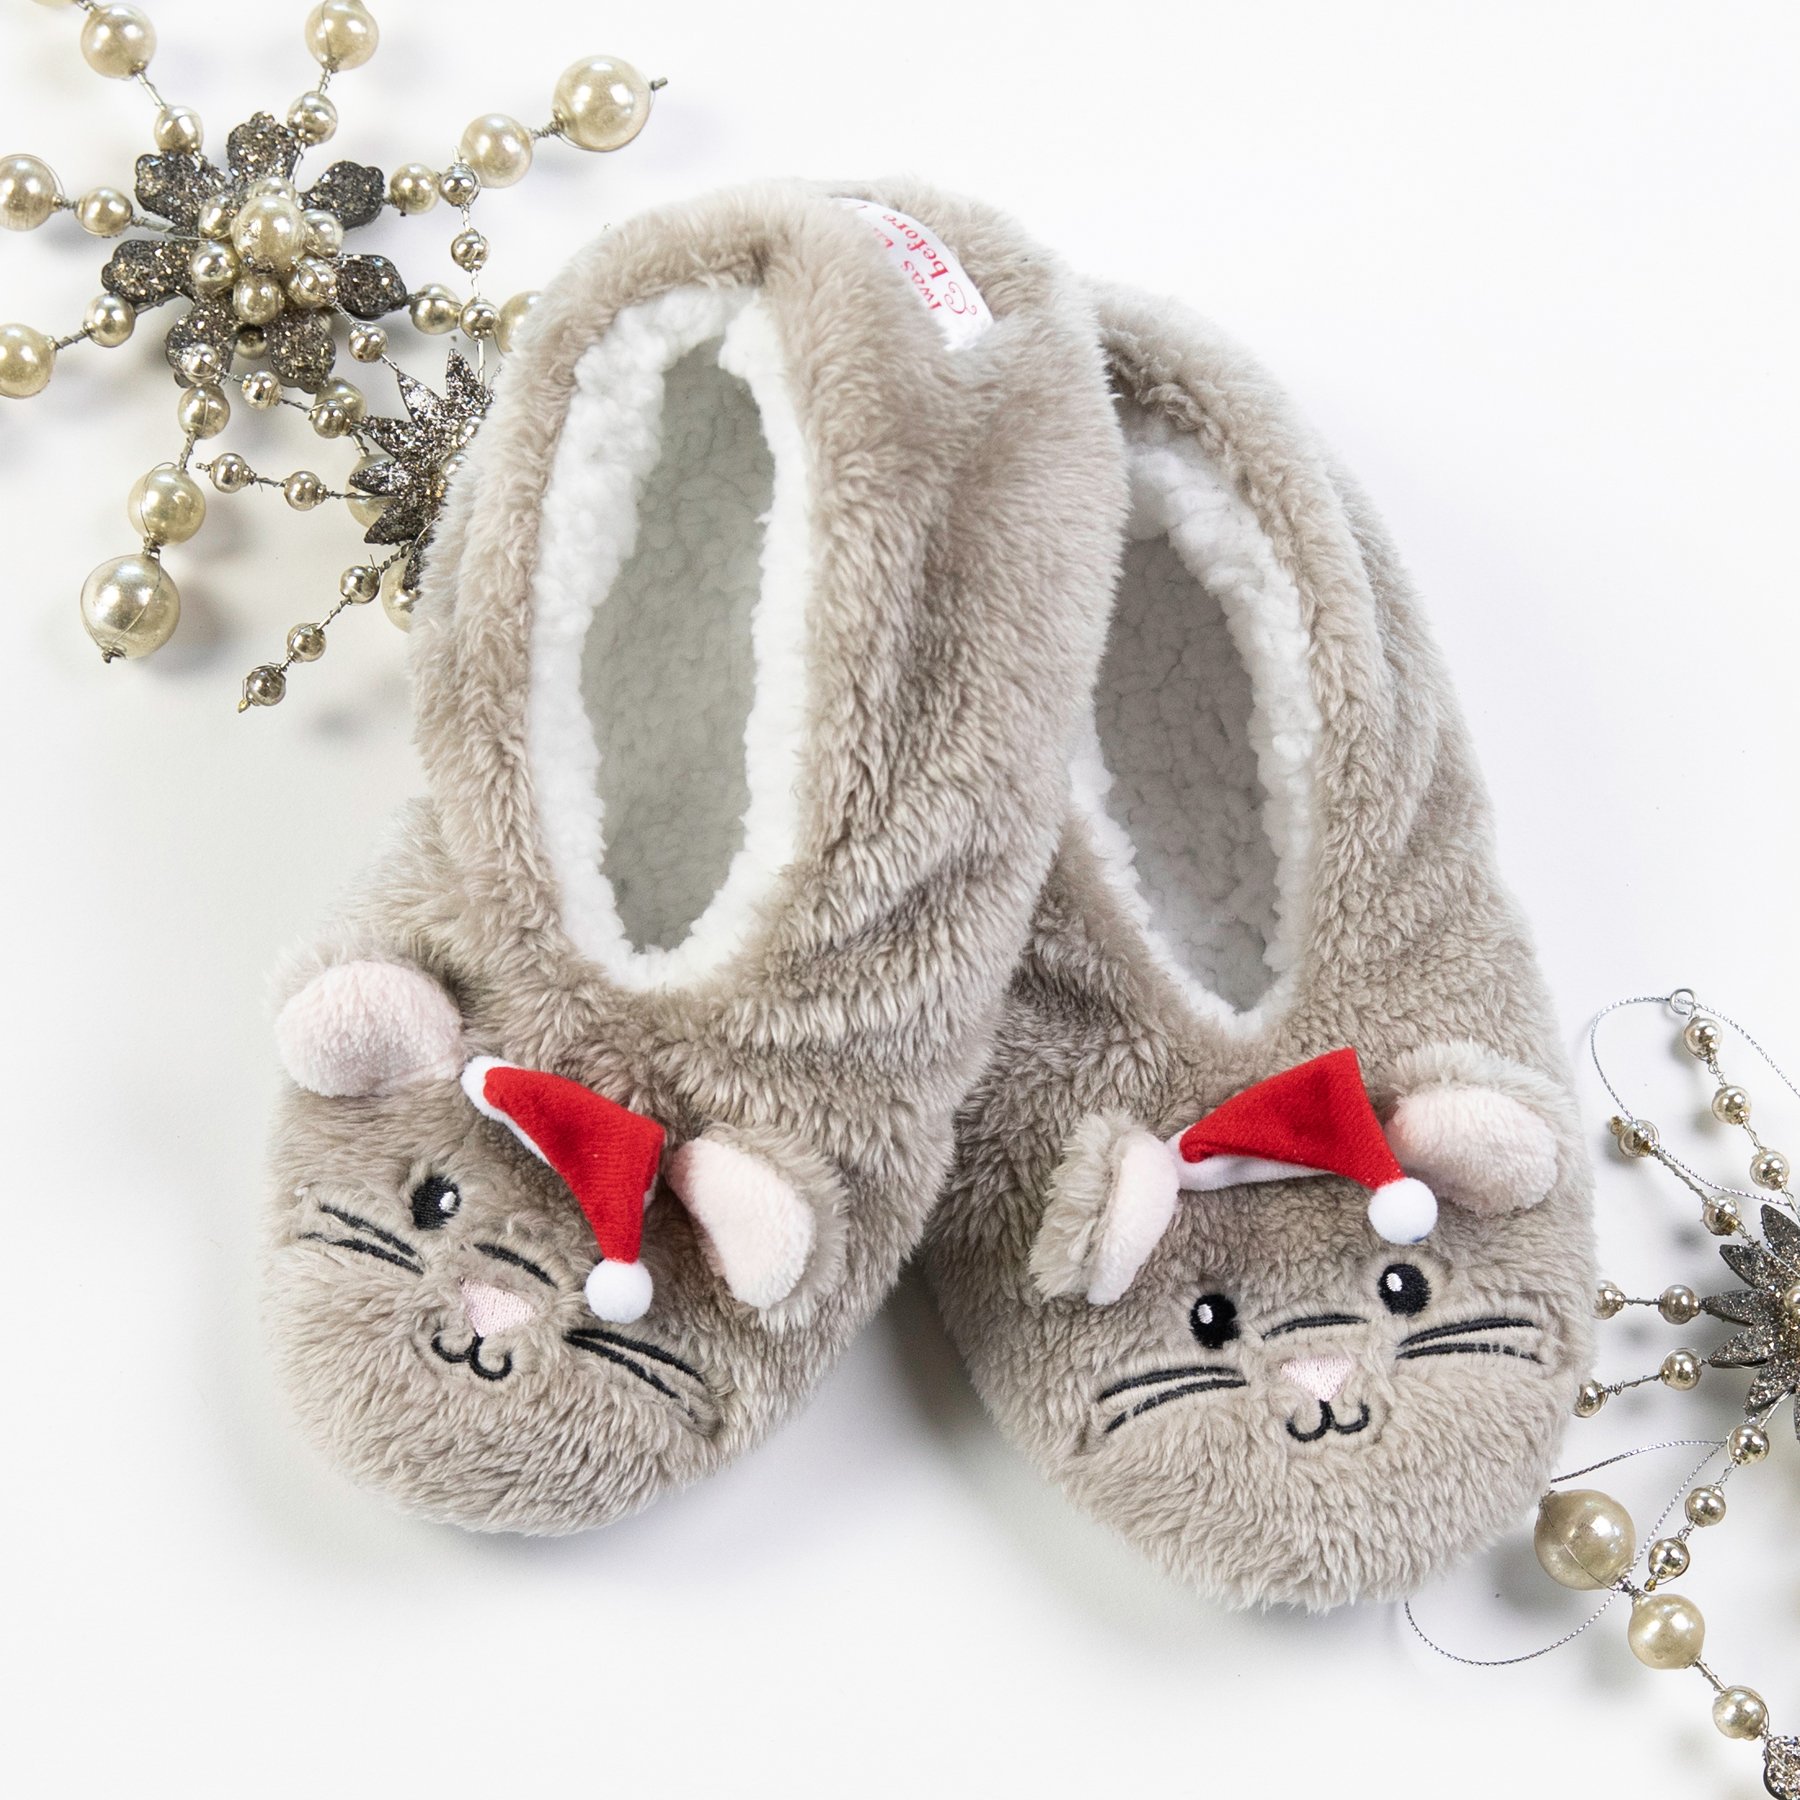 Faceplant Dreams Footsies Slippers Mouse Holiday Motif Large - image 3 of 5